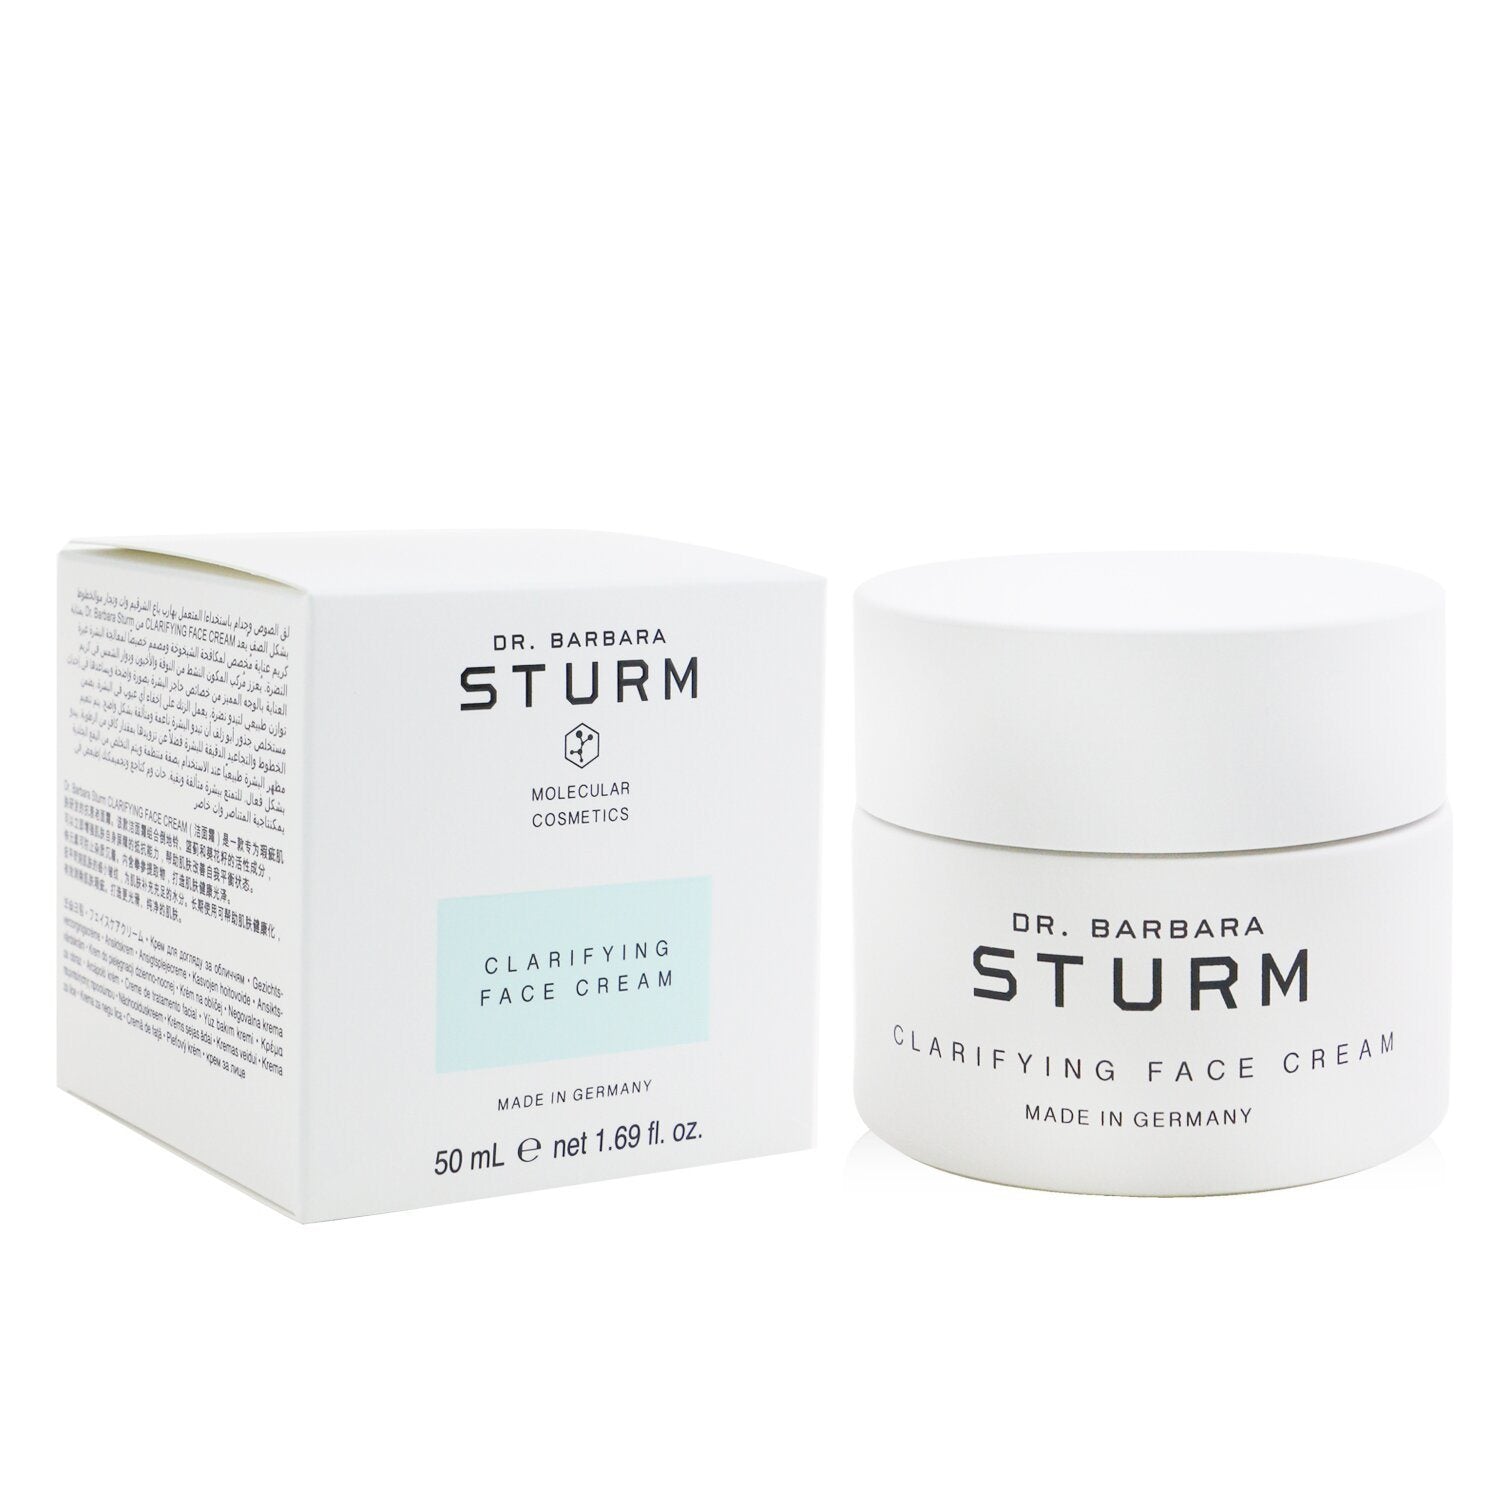 DR. BARBARA STURM - Clarifying Face Cream 33771 50ml/1.69oz is an effective moisturizer for anti-aging and blemished skin.